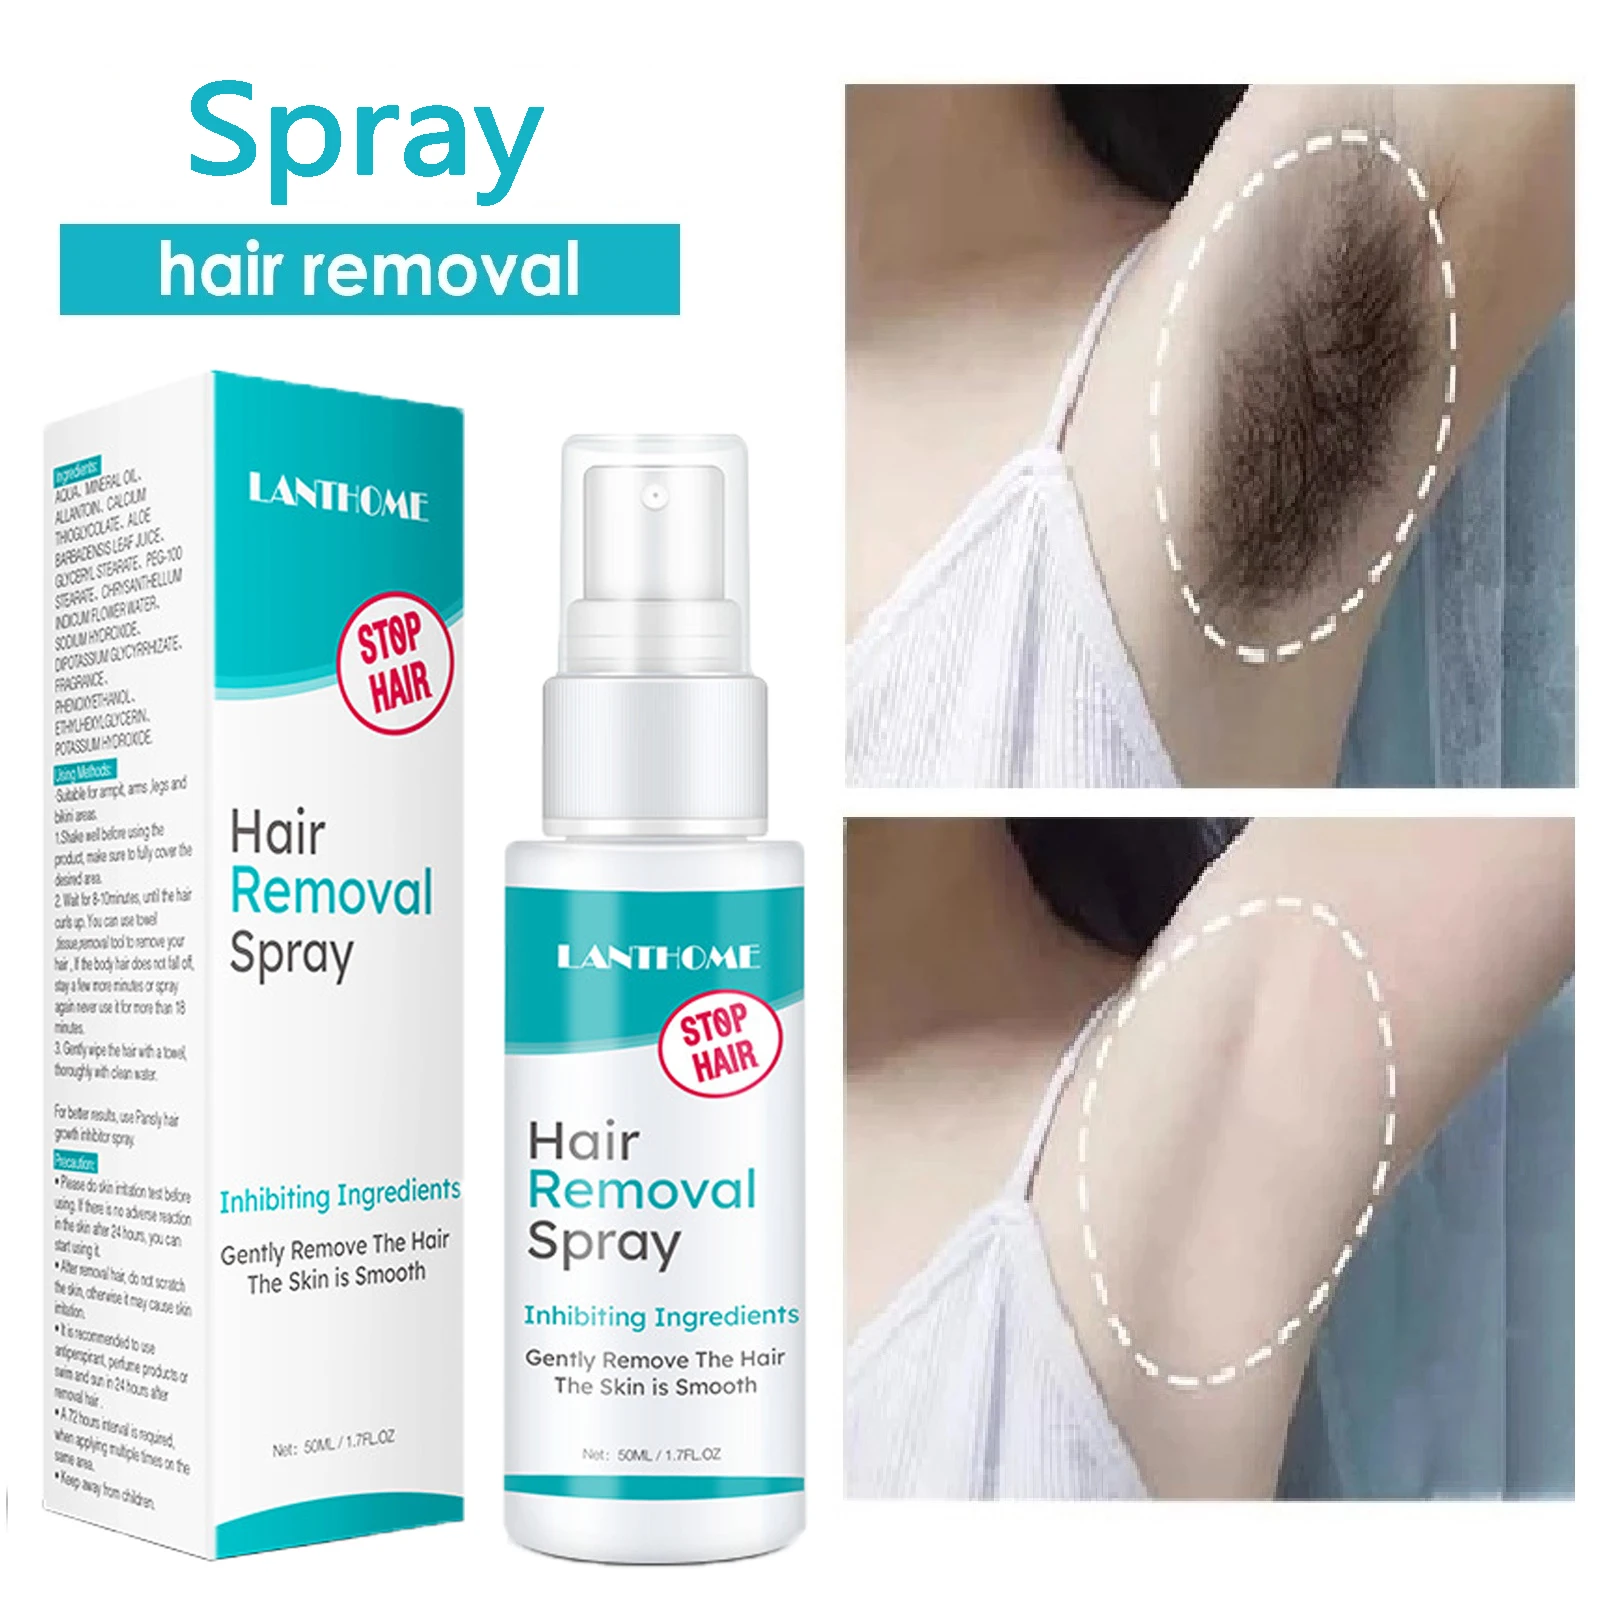 Hair Removal Spray Hair Growth Inhibitor Natural Painless Permanent Depilatory Cream For Women Men Whole Body Depilatory Product